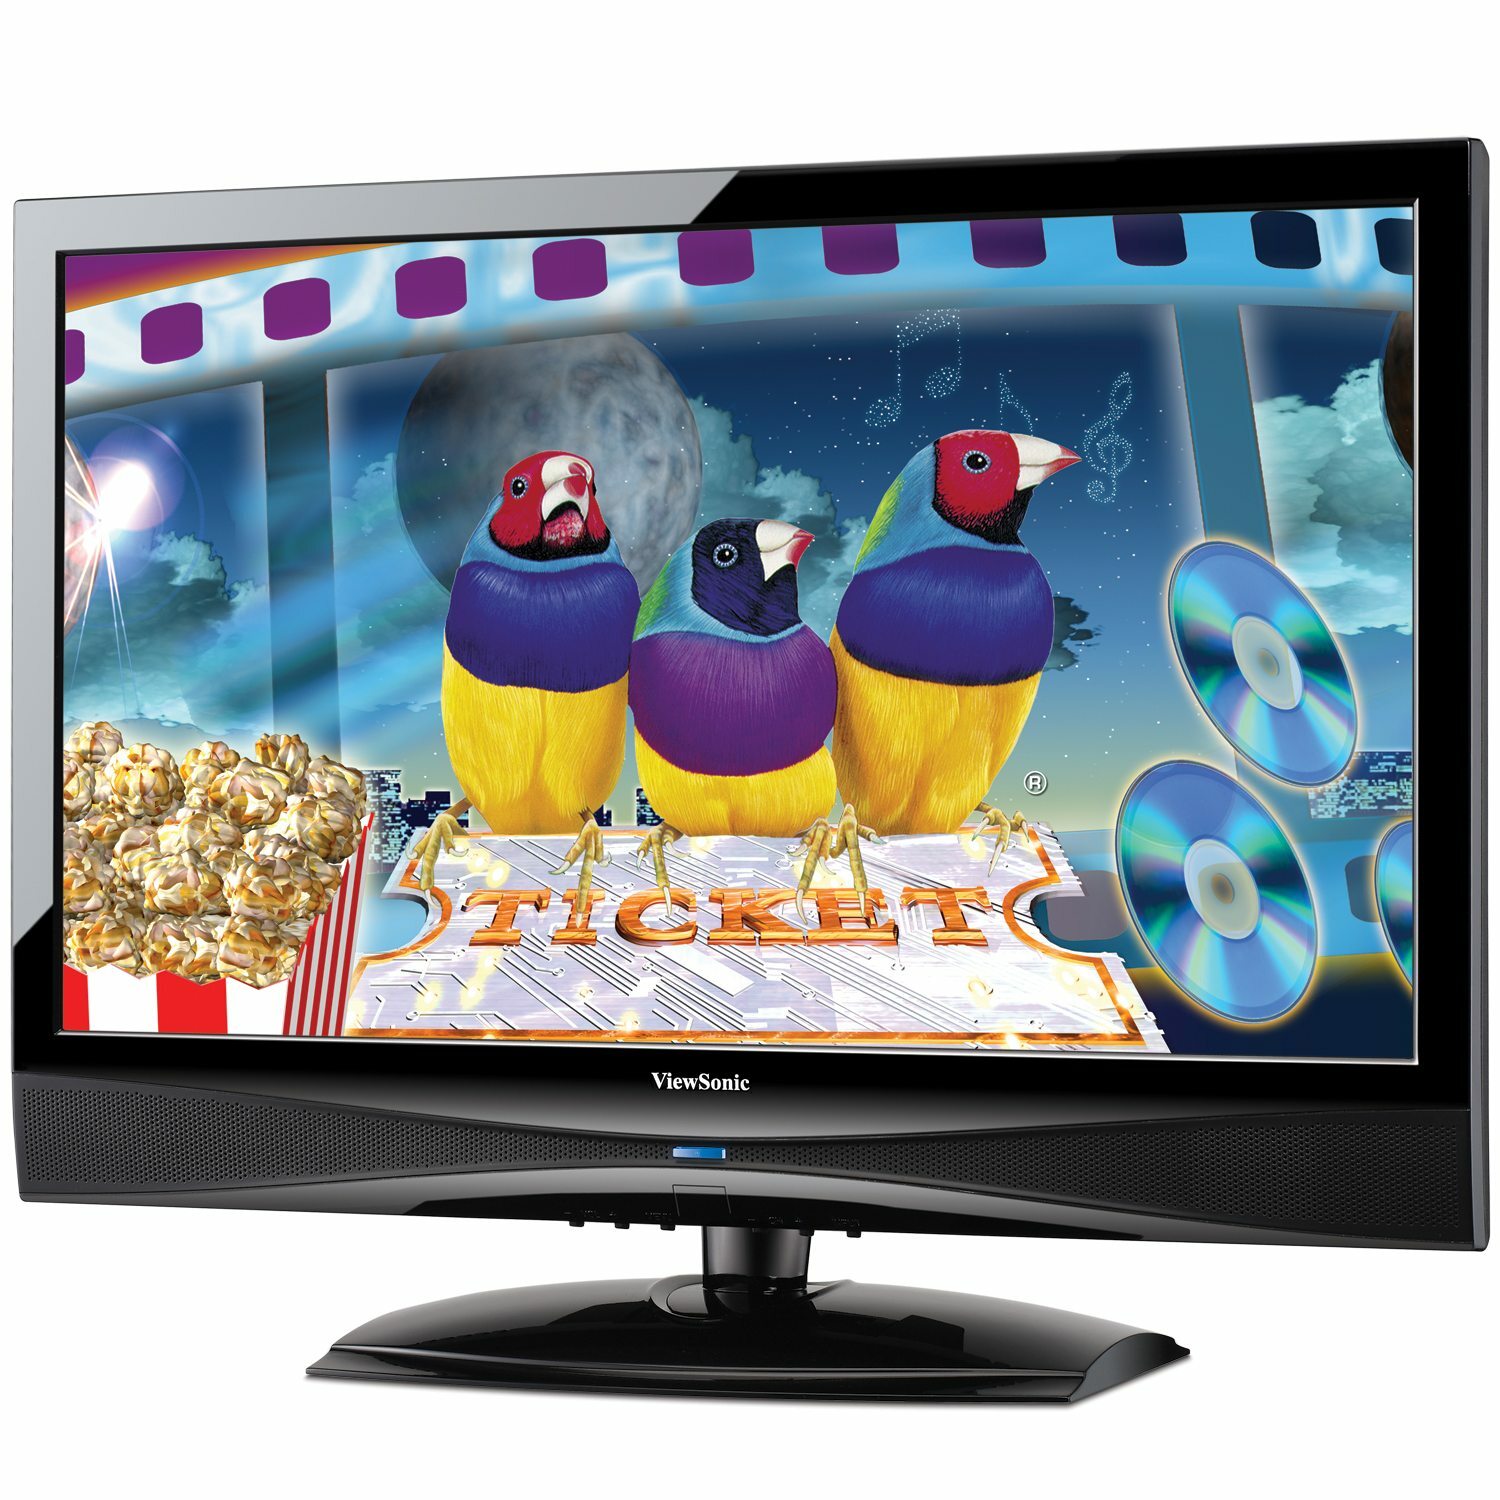 ViewSonic VT2430 24-inch 1080p LCD TV Review